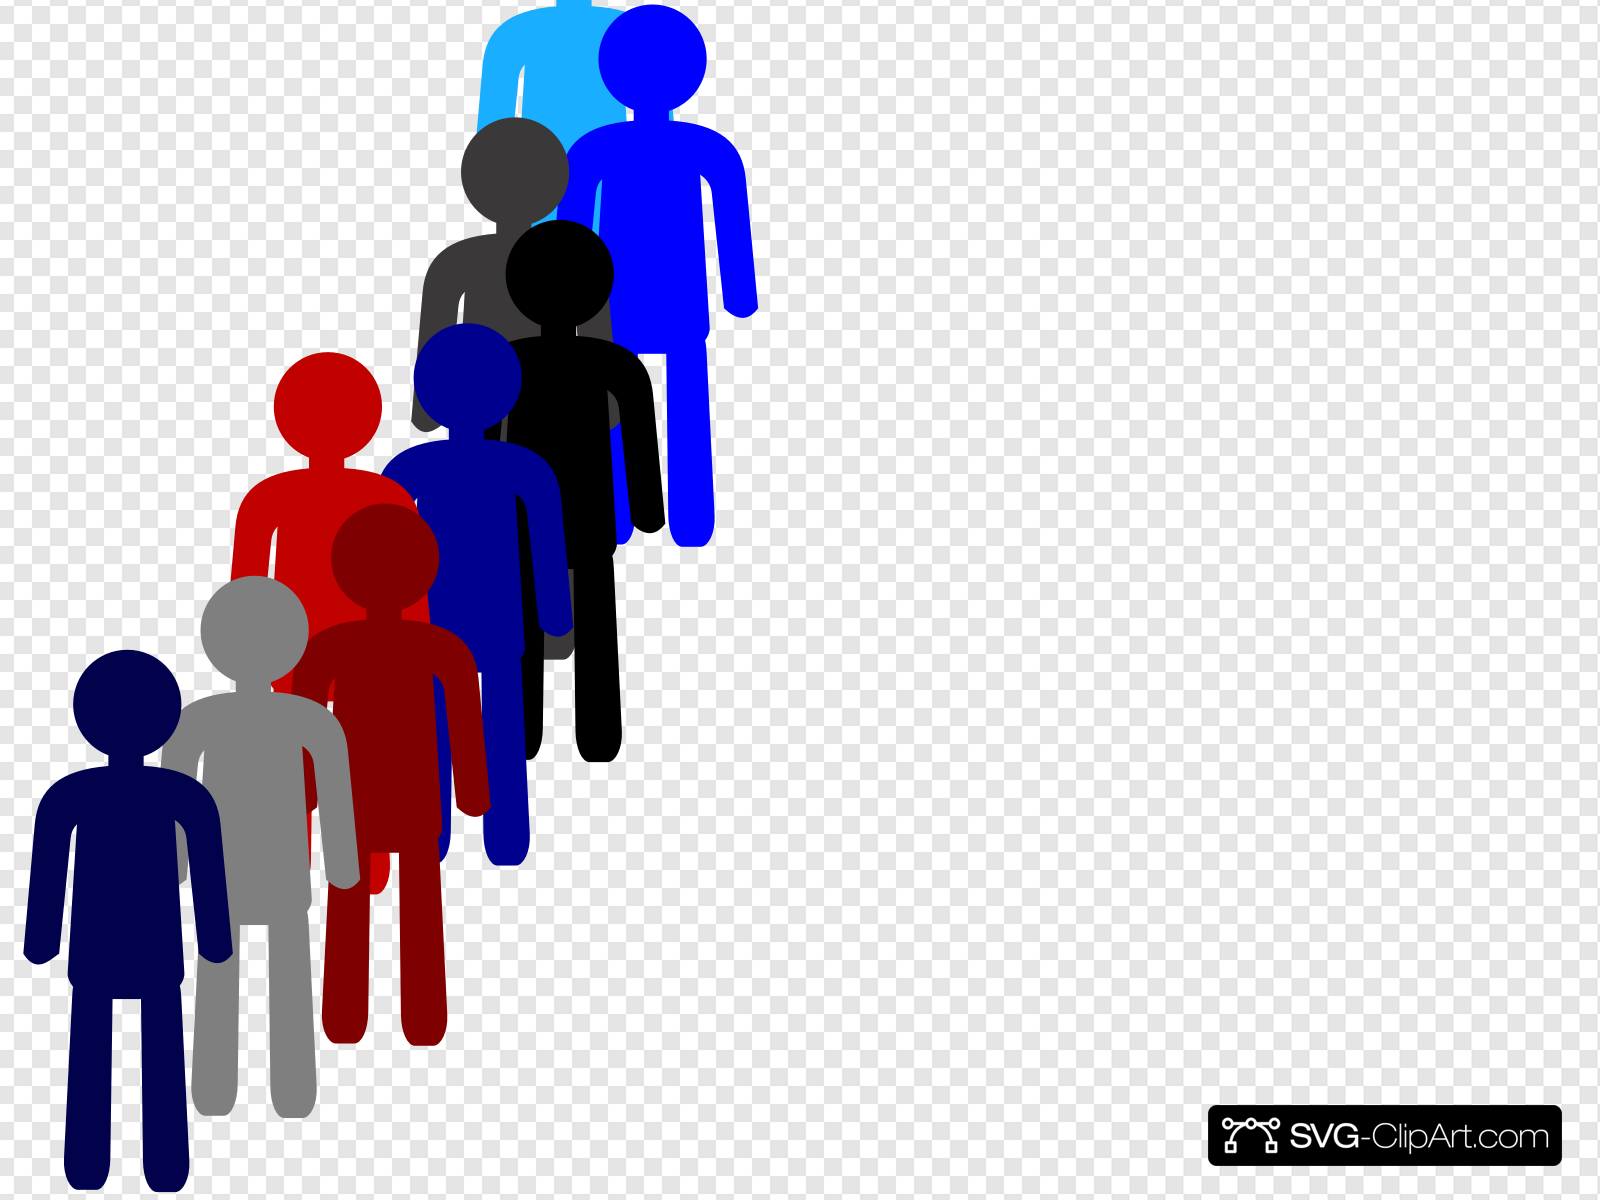 People In A Line Clip art, Icon and SVG.